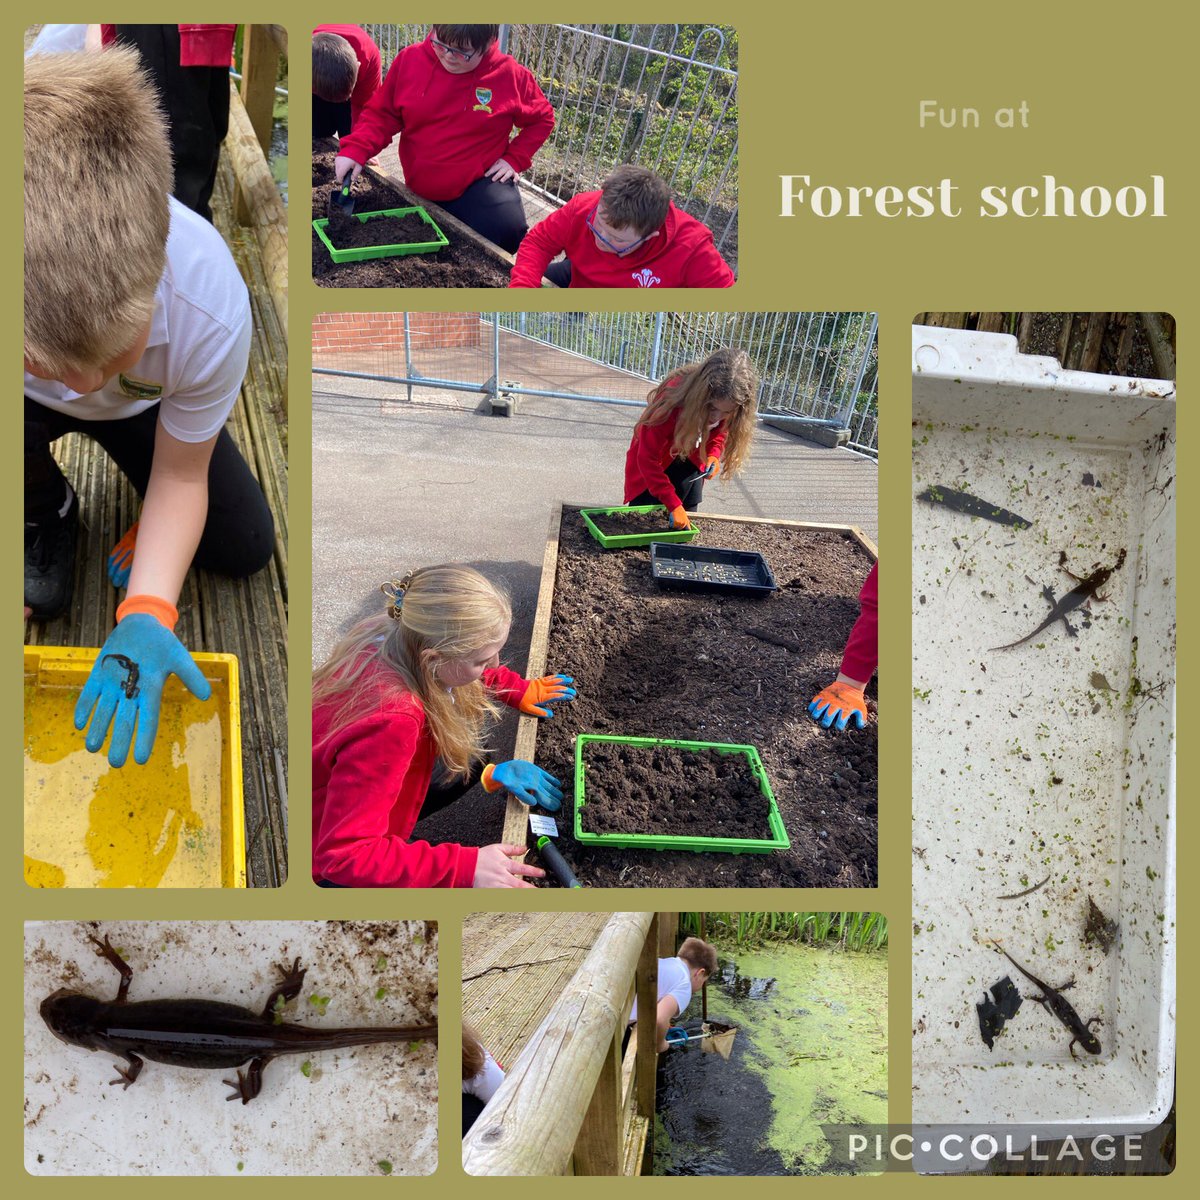 Some photos from our forest school session. Class 13 enjoyed planting and pond dipping. @garntegprimary @MrsSParkerEvans @PondDip @GwentWildlife @OlwTorfaen @_OLW_ #outdoorlearningweek